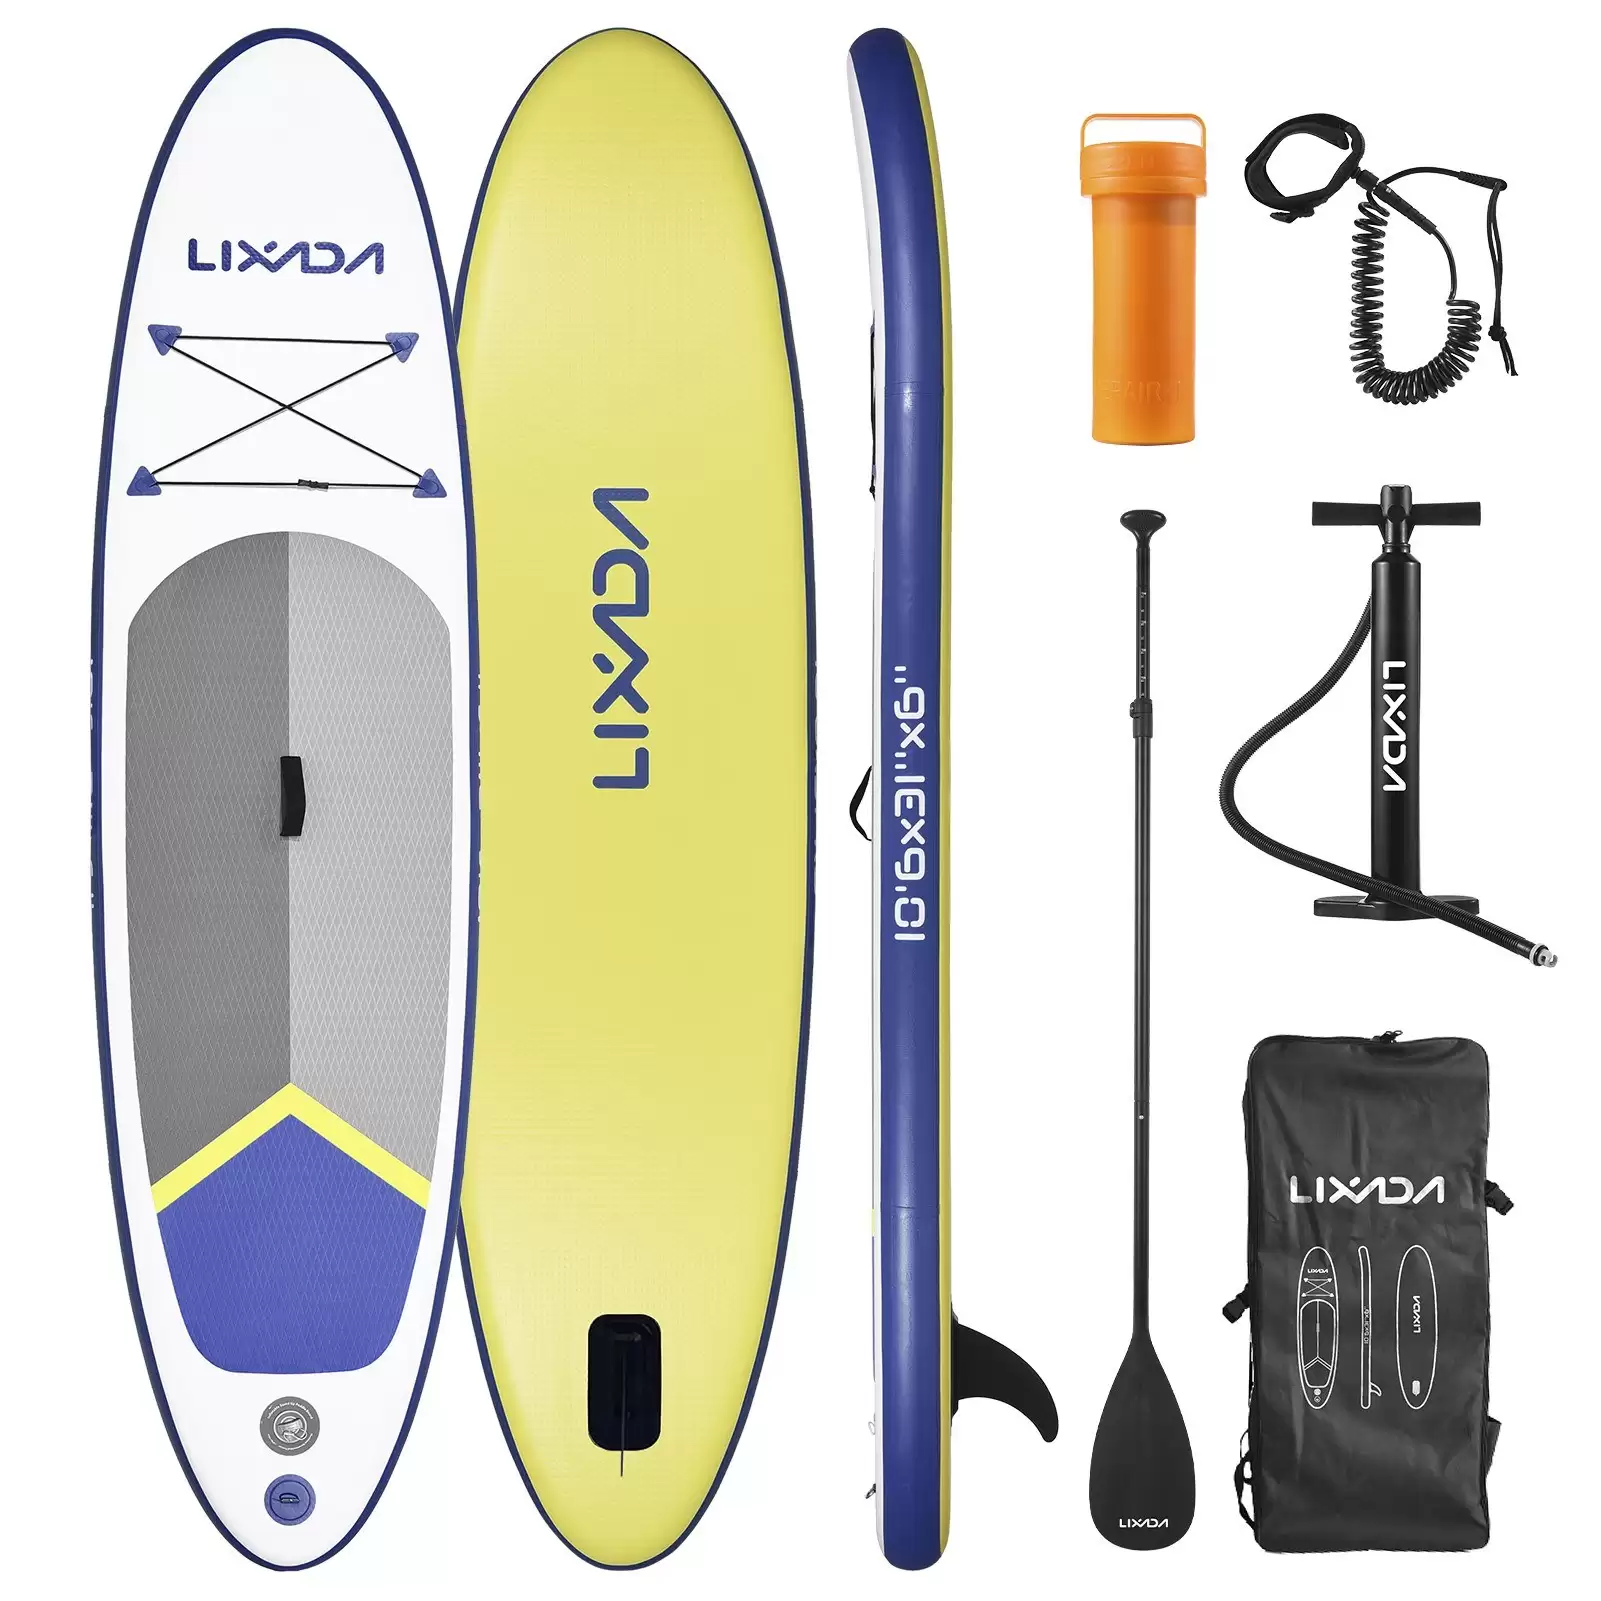 Pay Only € 119.99 Lixada 3.2m Inflatable Paddle Board Stand Up At Cafago